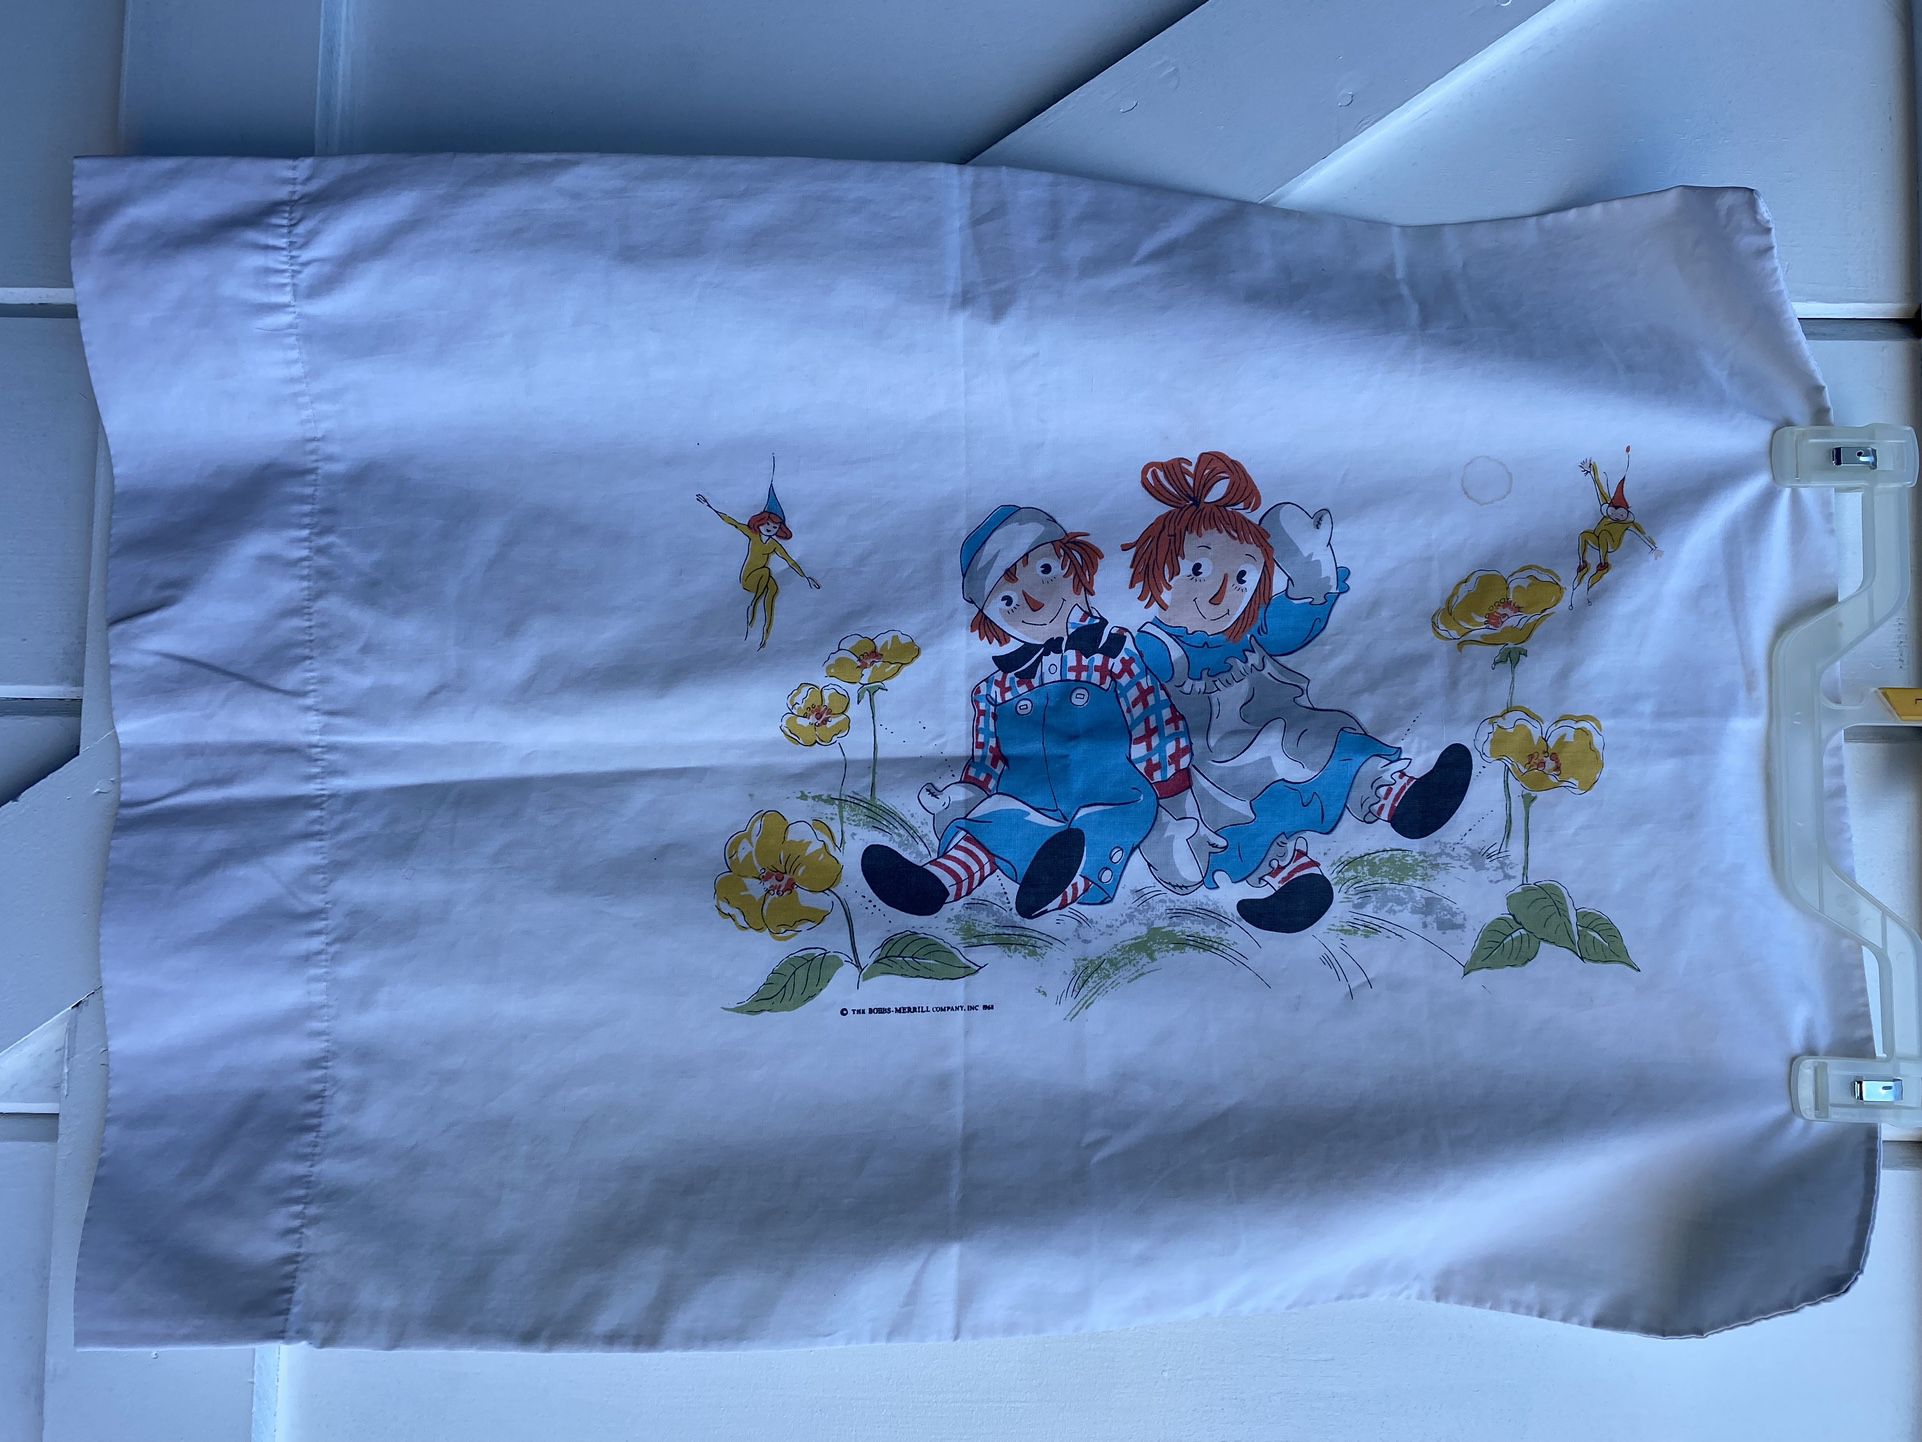 Vintage 1968 Raggedy Ann and Andy Pillowcase Pillow Case Fabric 1 Pillow Case